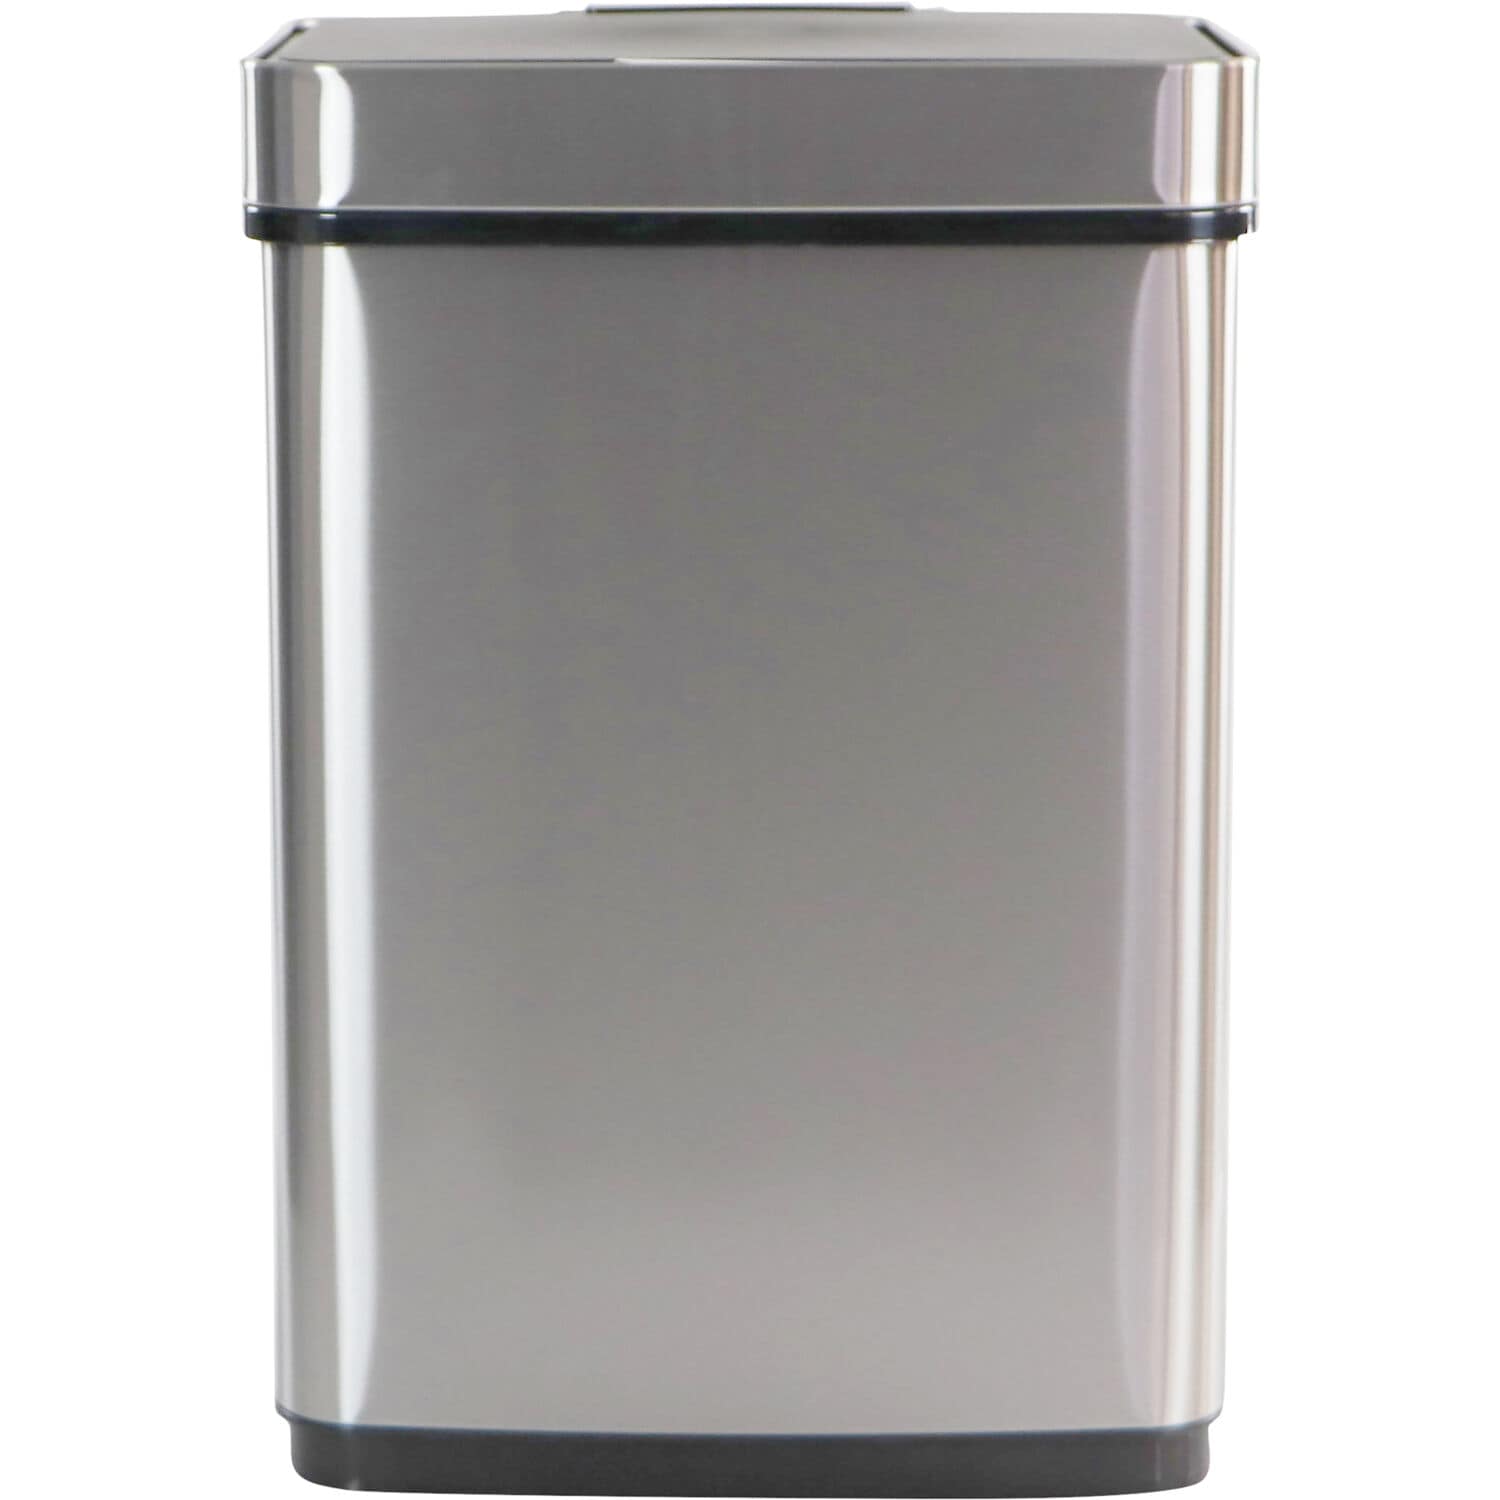 Halo 13-Gallons Stainless Steel Kitchen Trash Can with Lid Indoor